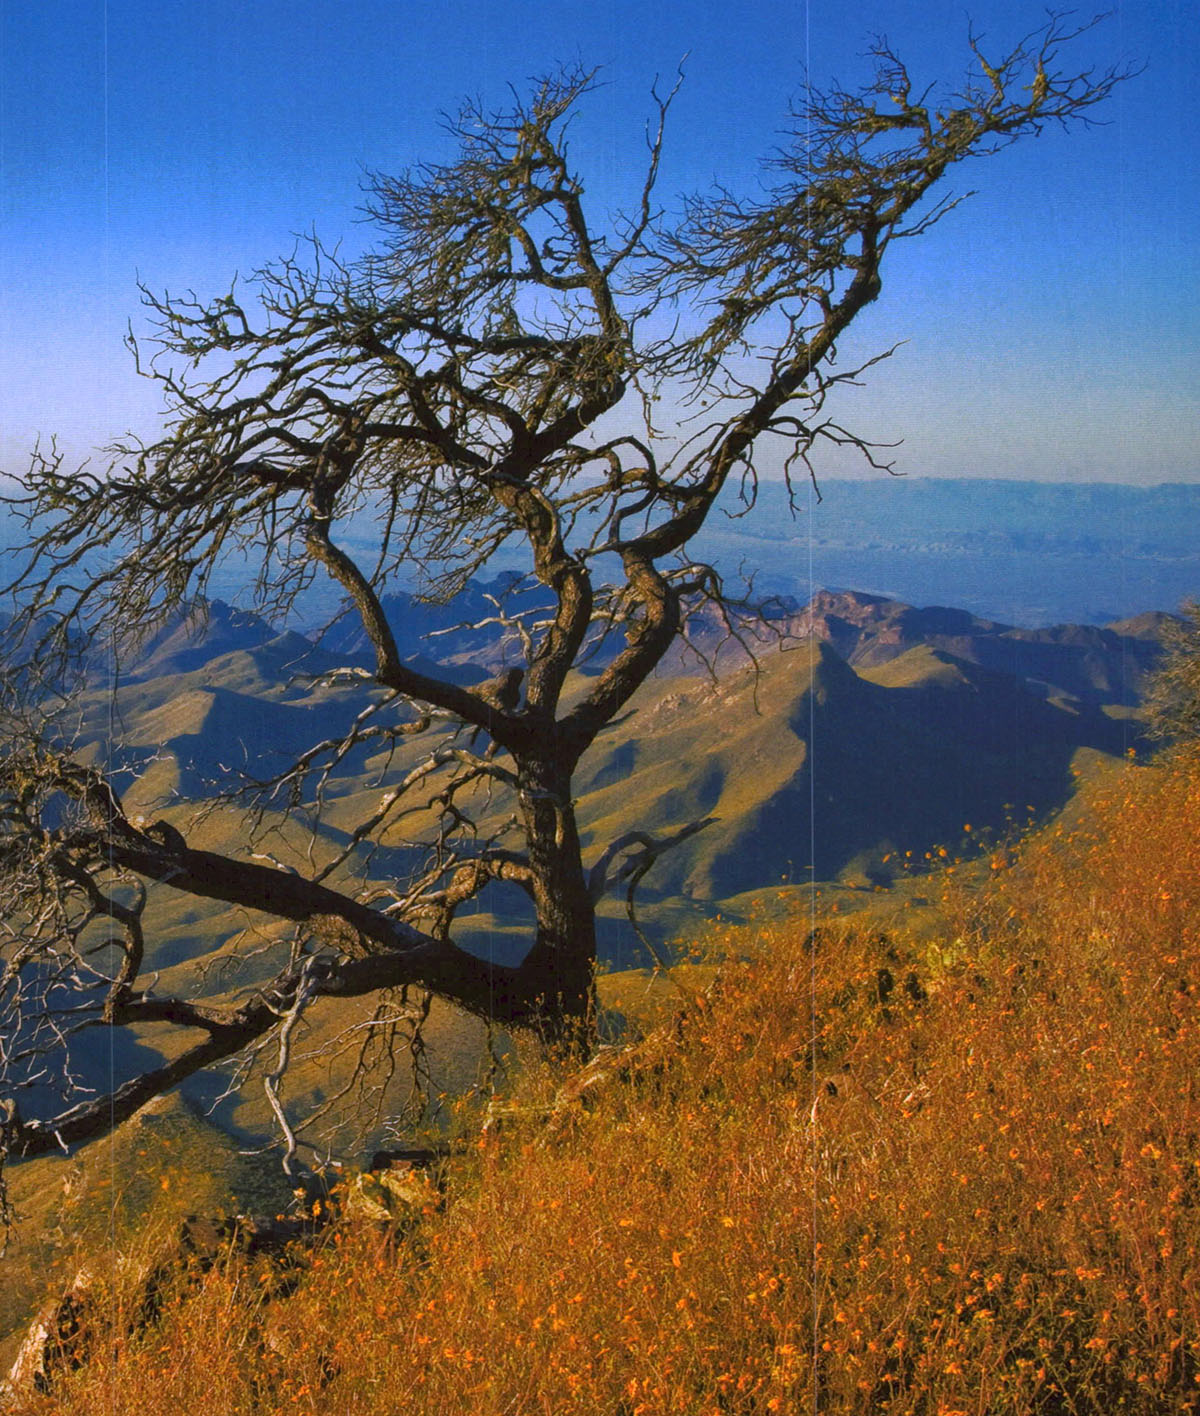 Tree with numerous branches in the foreground and mountains in the background